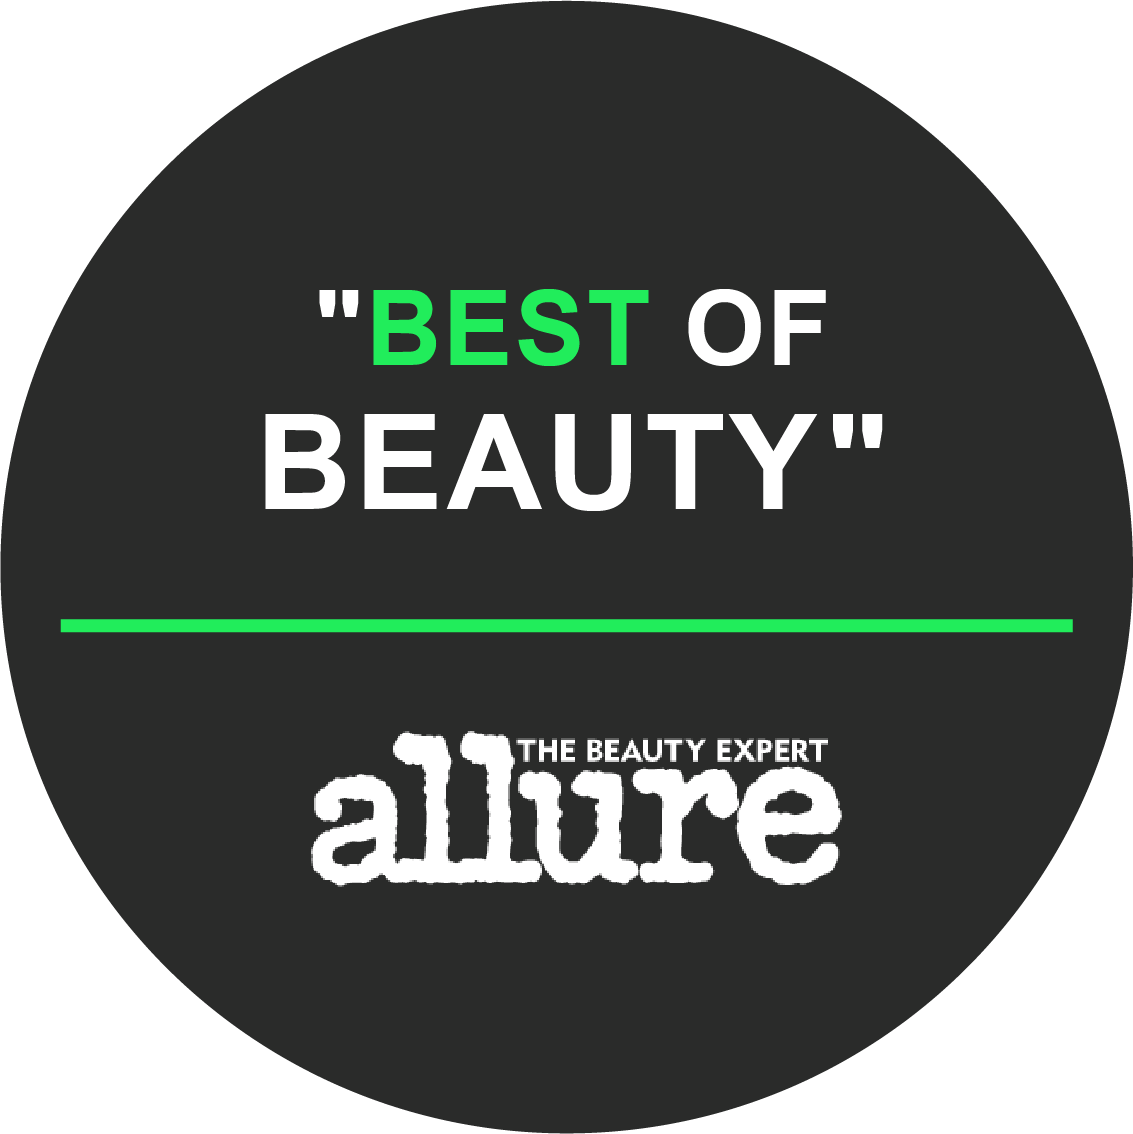 Best of Beauty, Allure the Beauty Expert